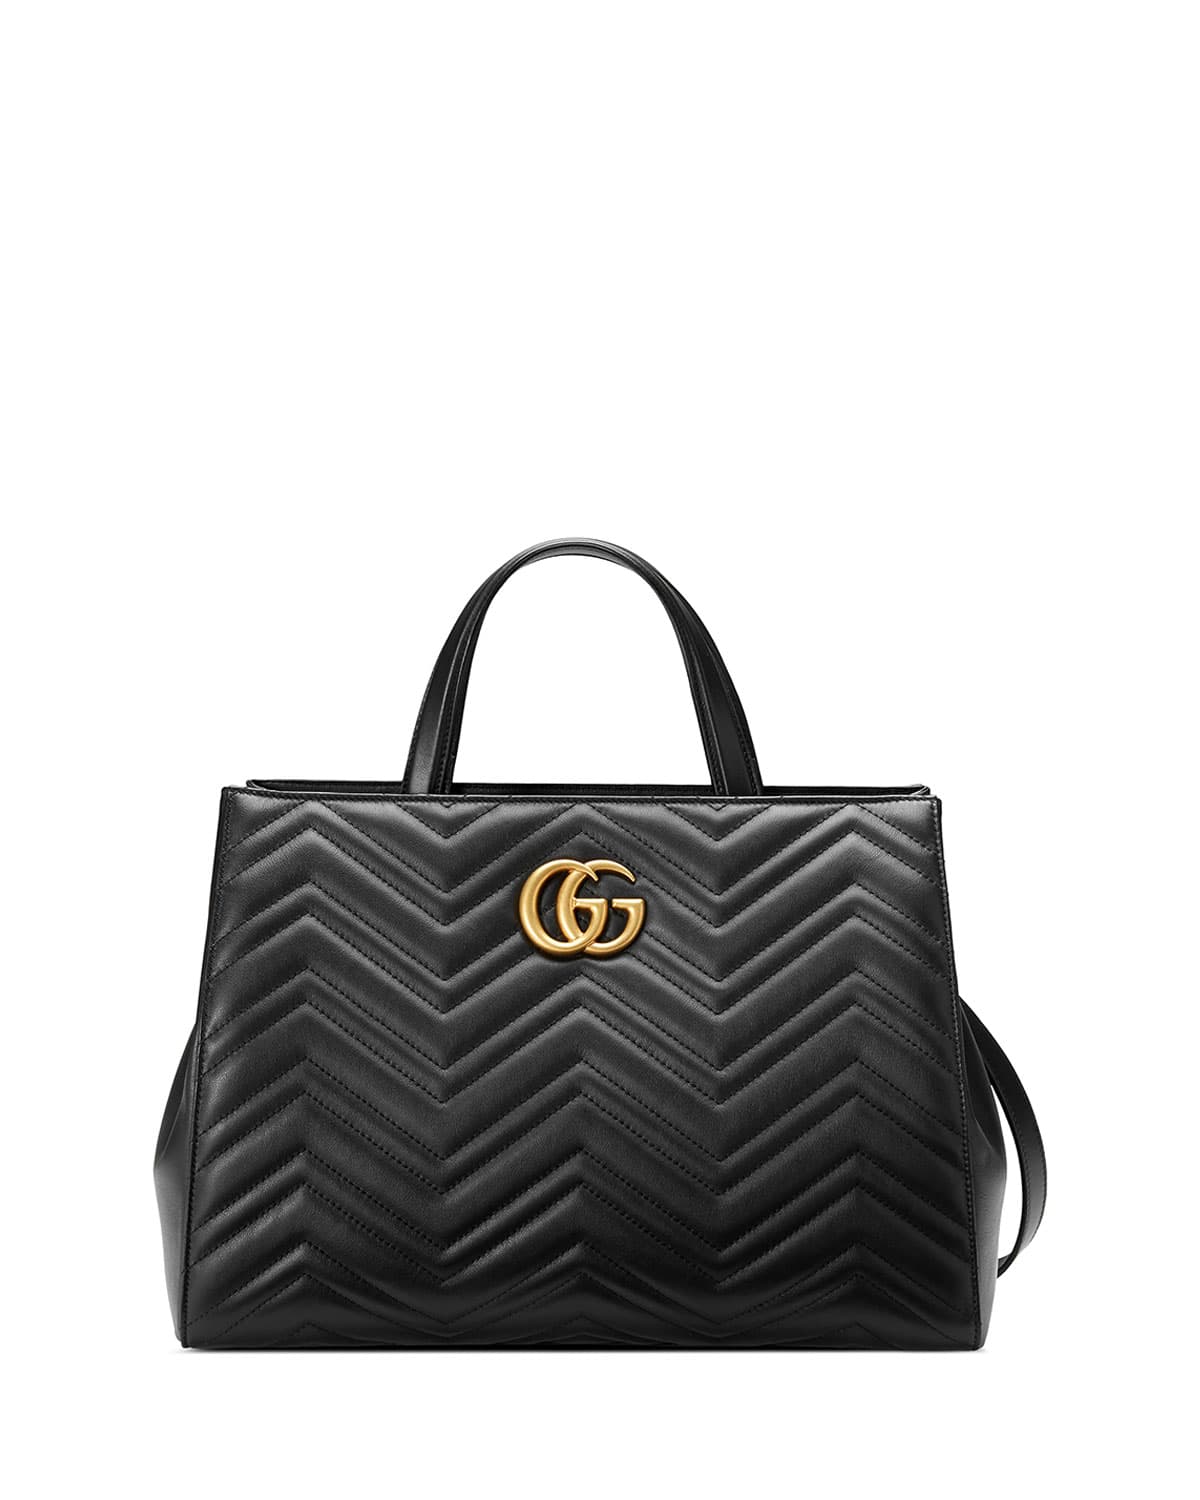 Gucci Bags Black Price | Confederated Tribes of the Umatilla Indian Reservation